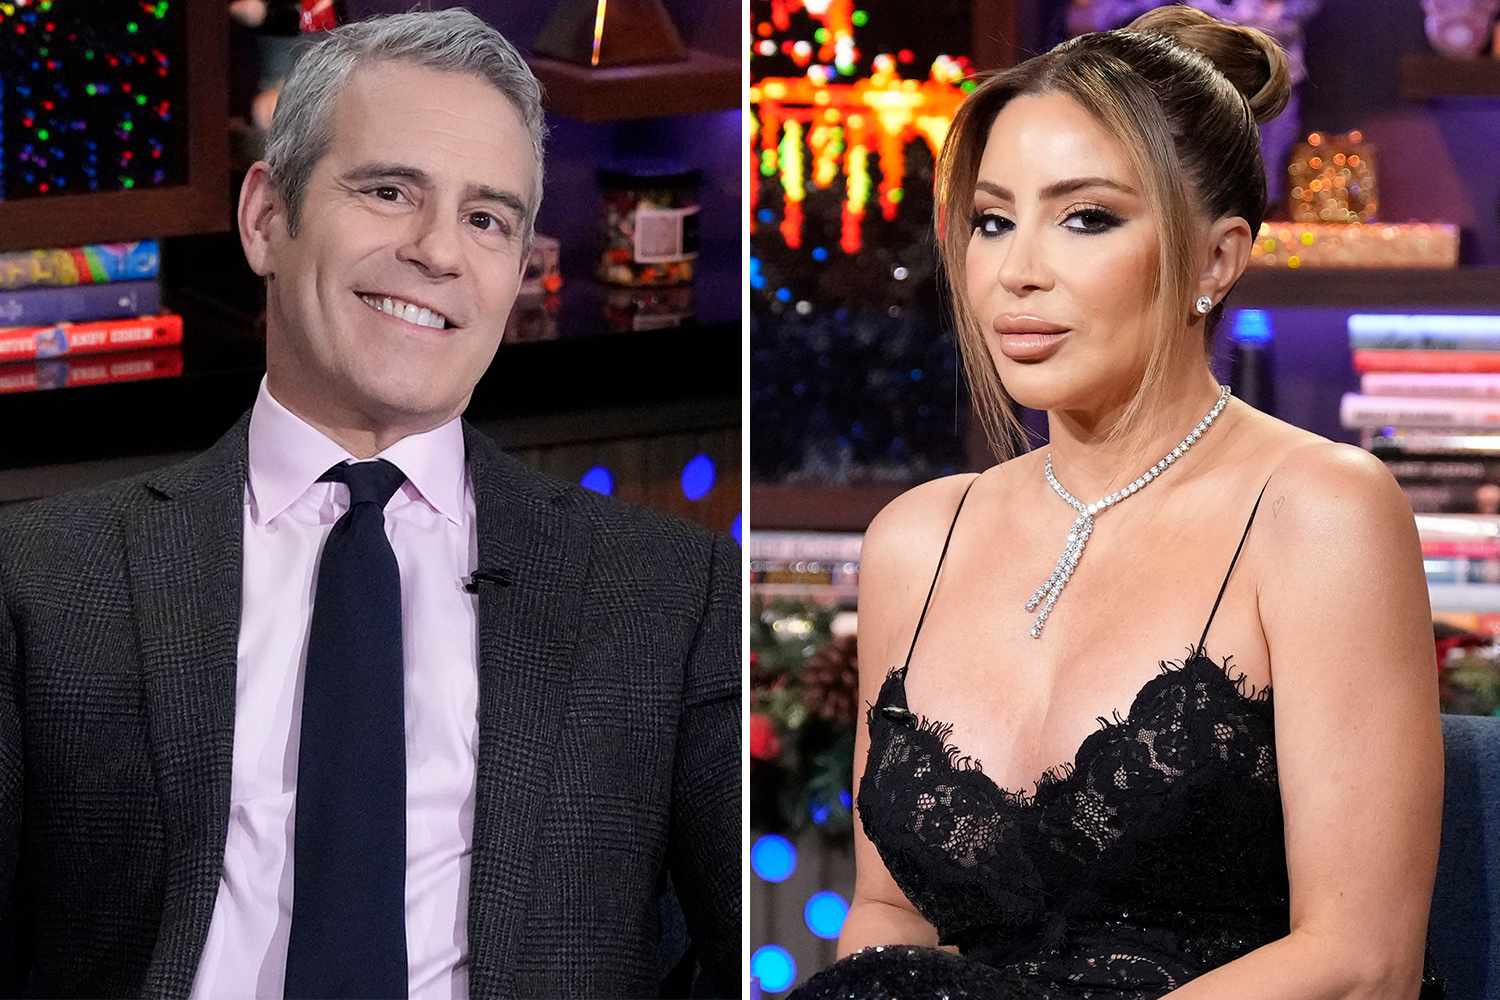 Andy Cohen BLASTED Larsa Pippen For Attacking A Child – Hear the Outrageous Exchange